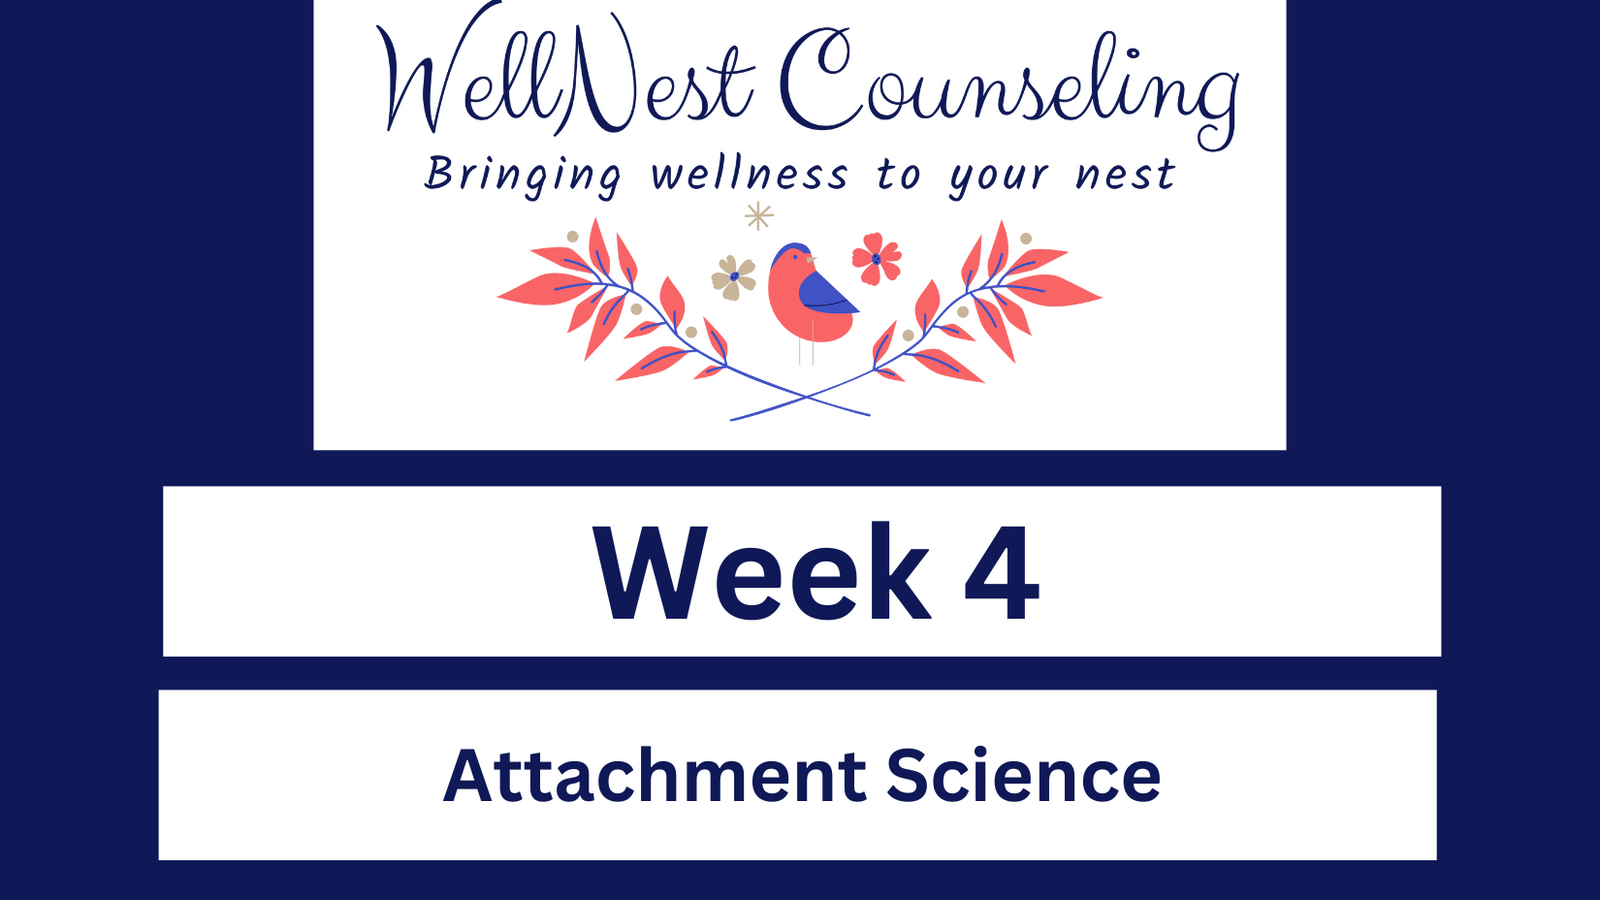 Week 4 Attachment Science